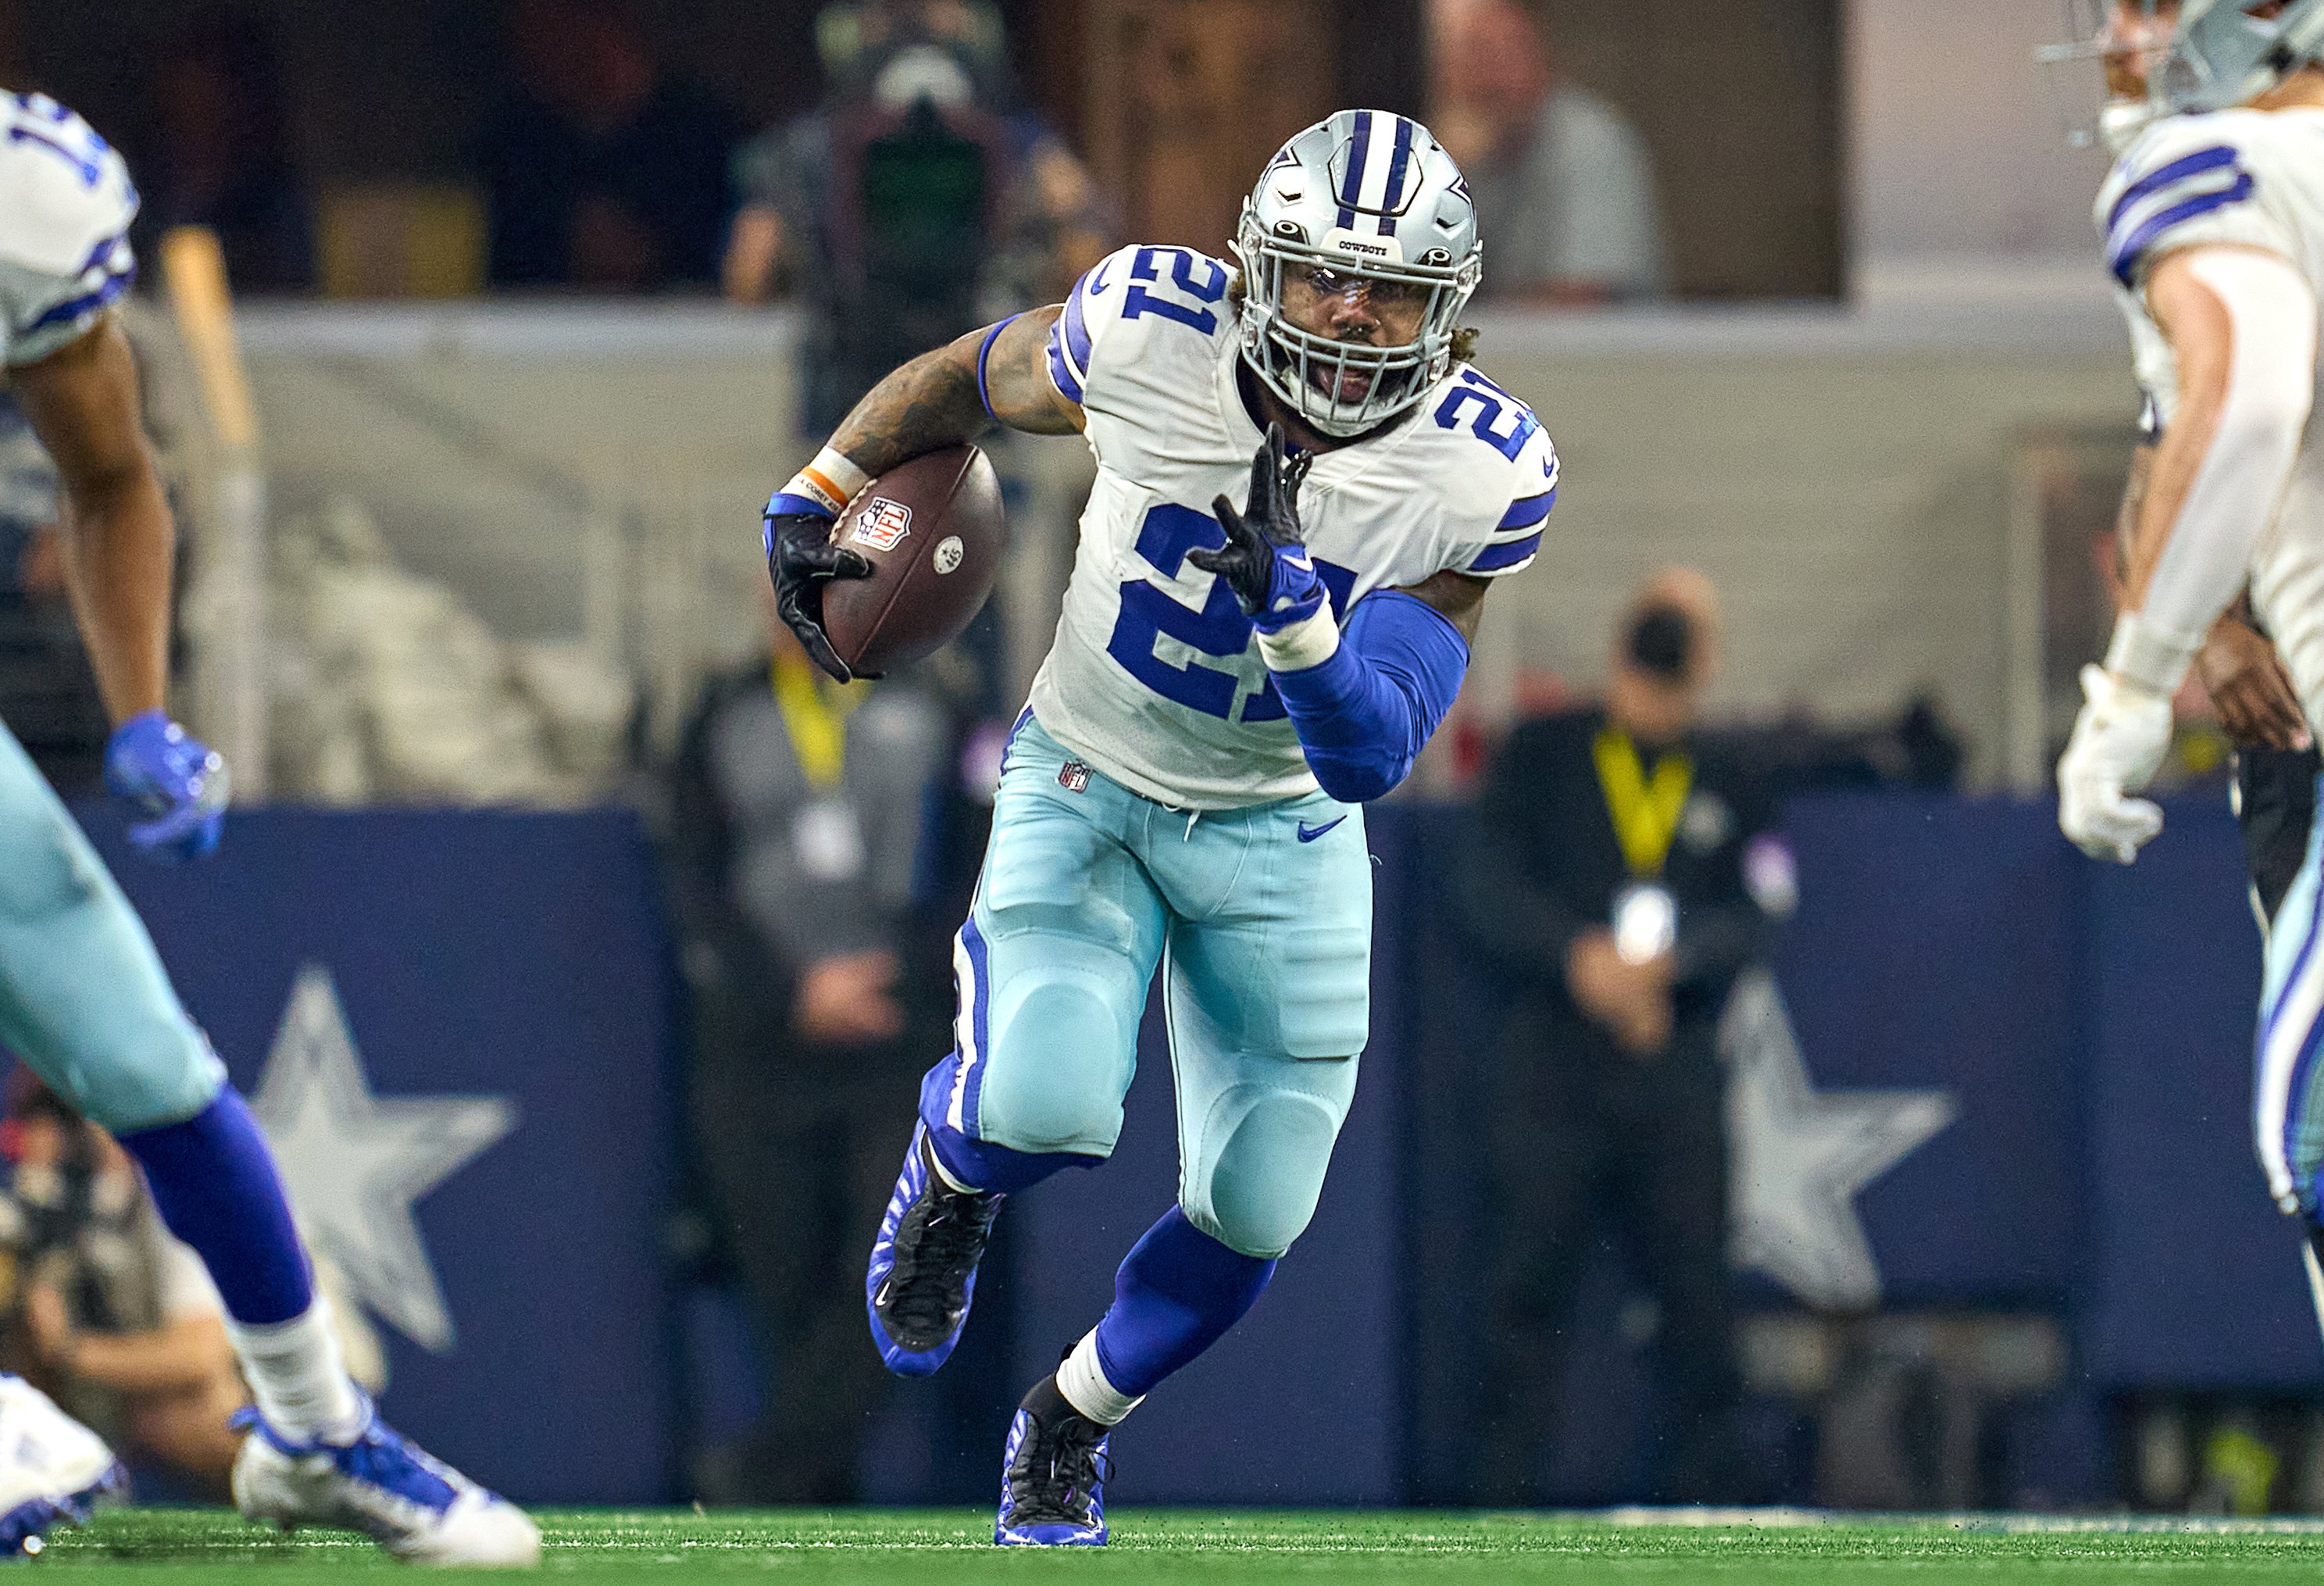 2022 Cowboys Free Agency: Full list of players set to hit free